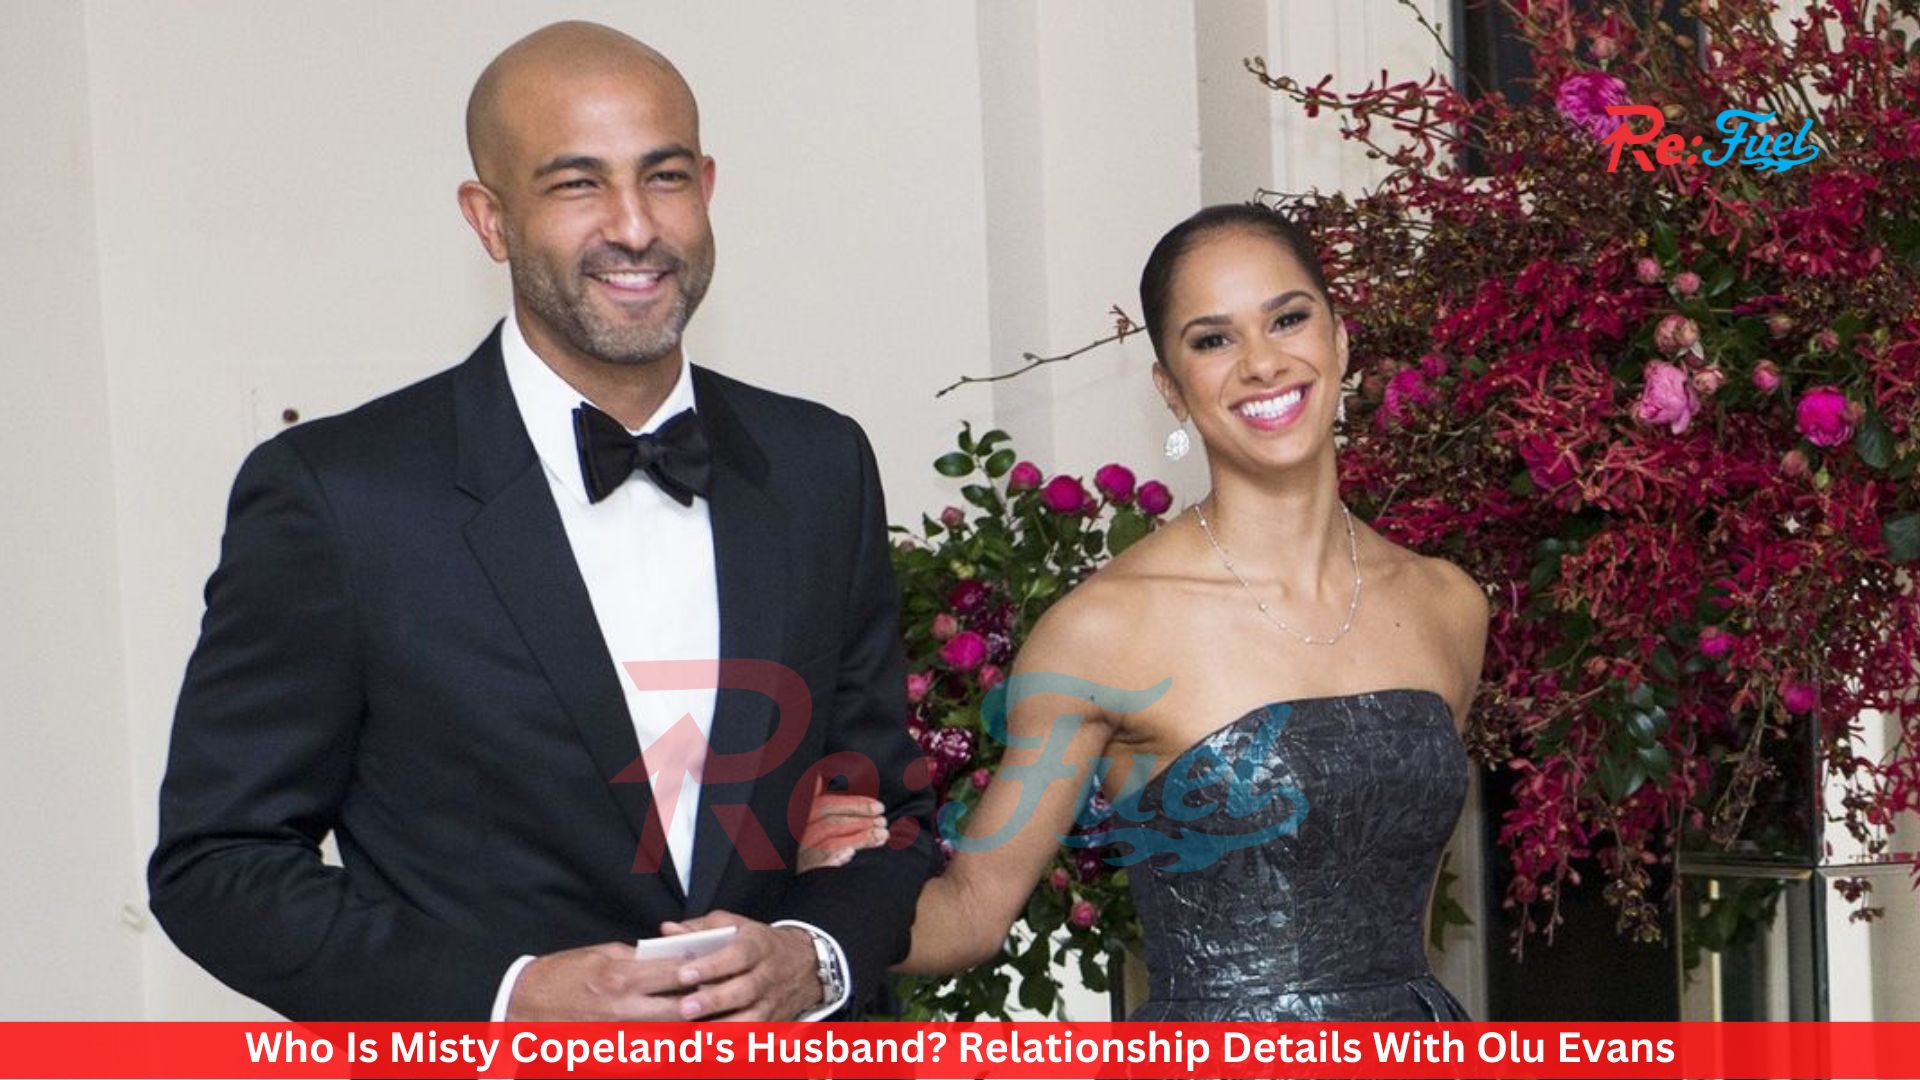 Who Is Misty Copeland's Husband? Relationship Details With Olu Evans